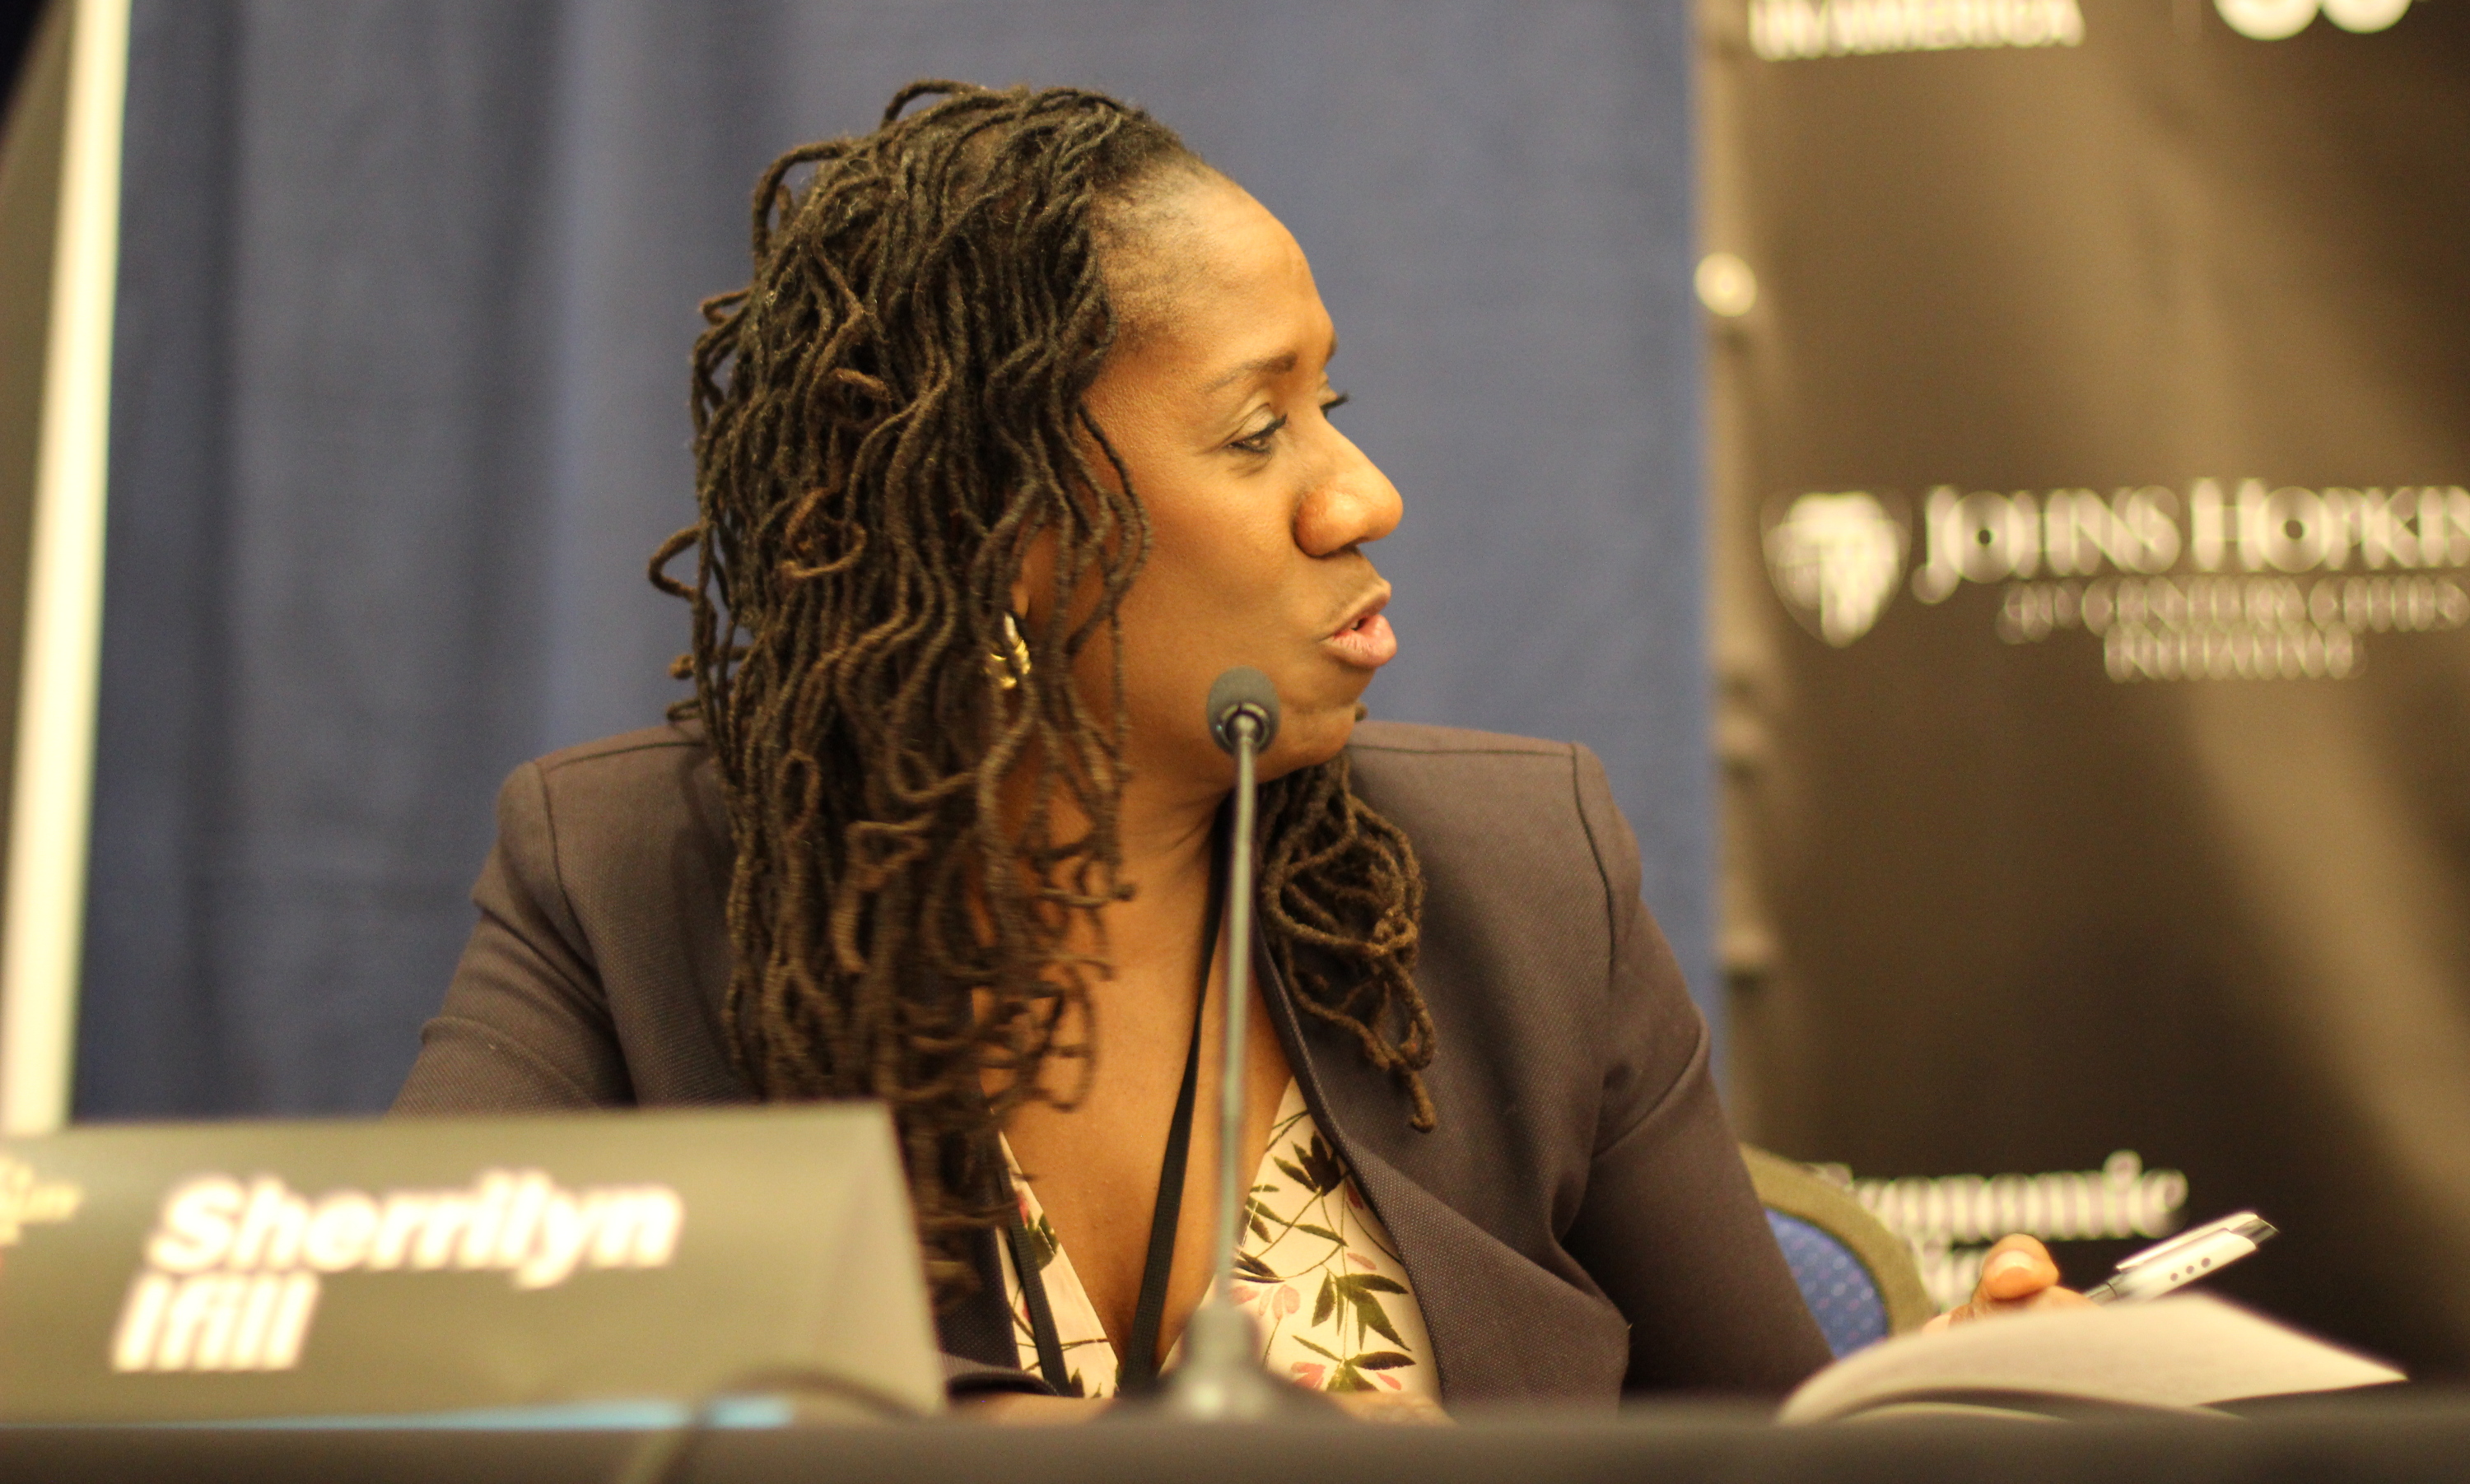 Sherrilyn Ifill gestures during the remedies panel